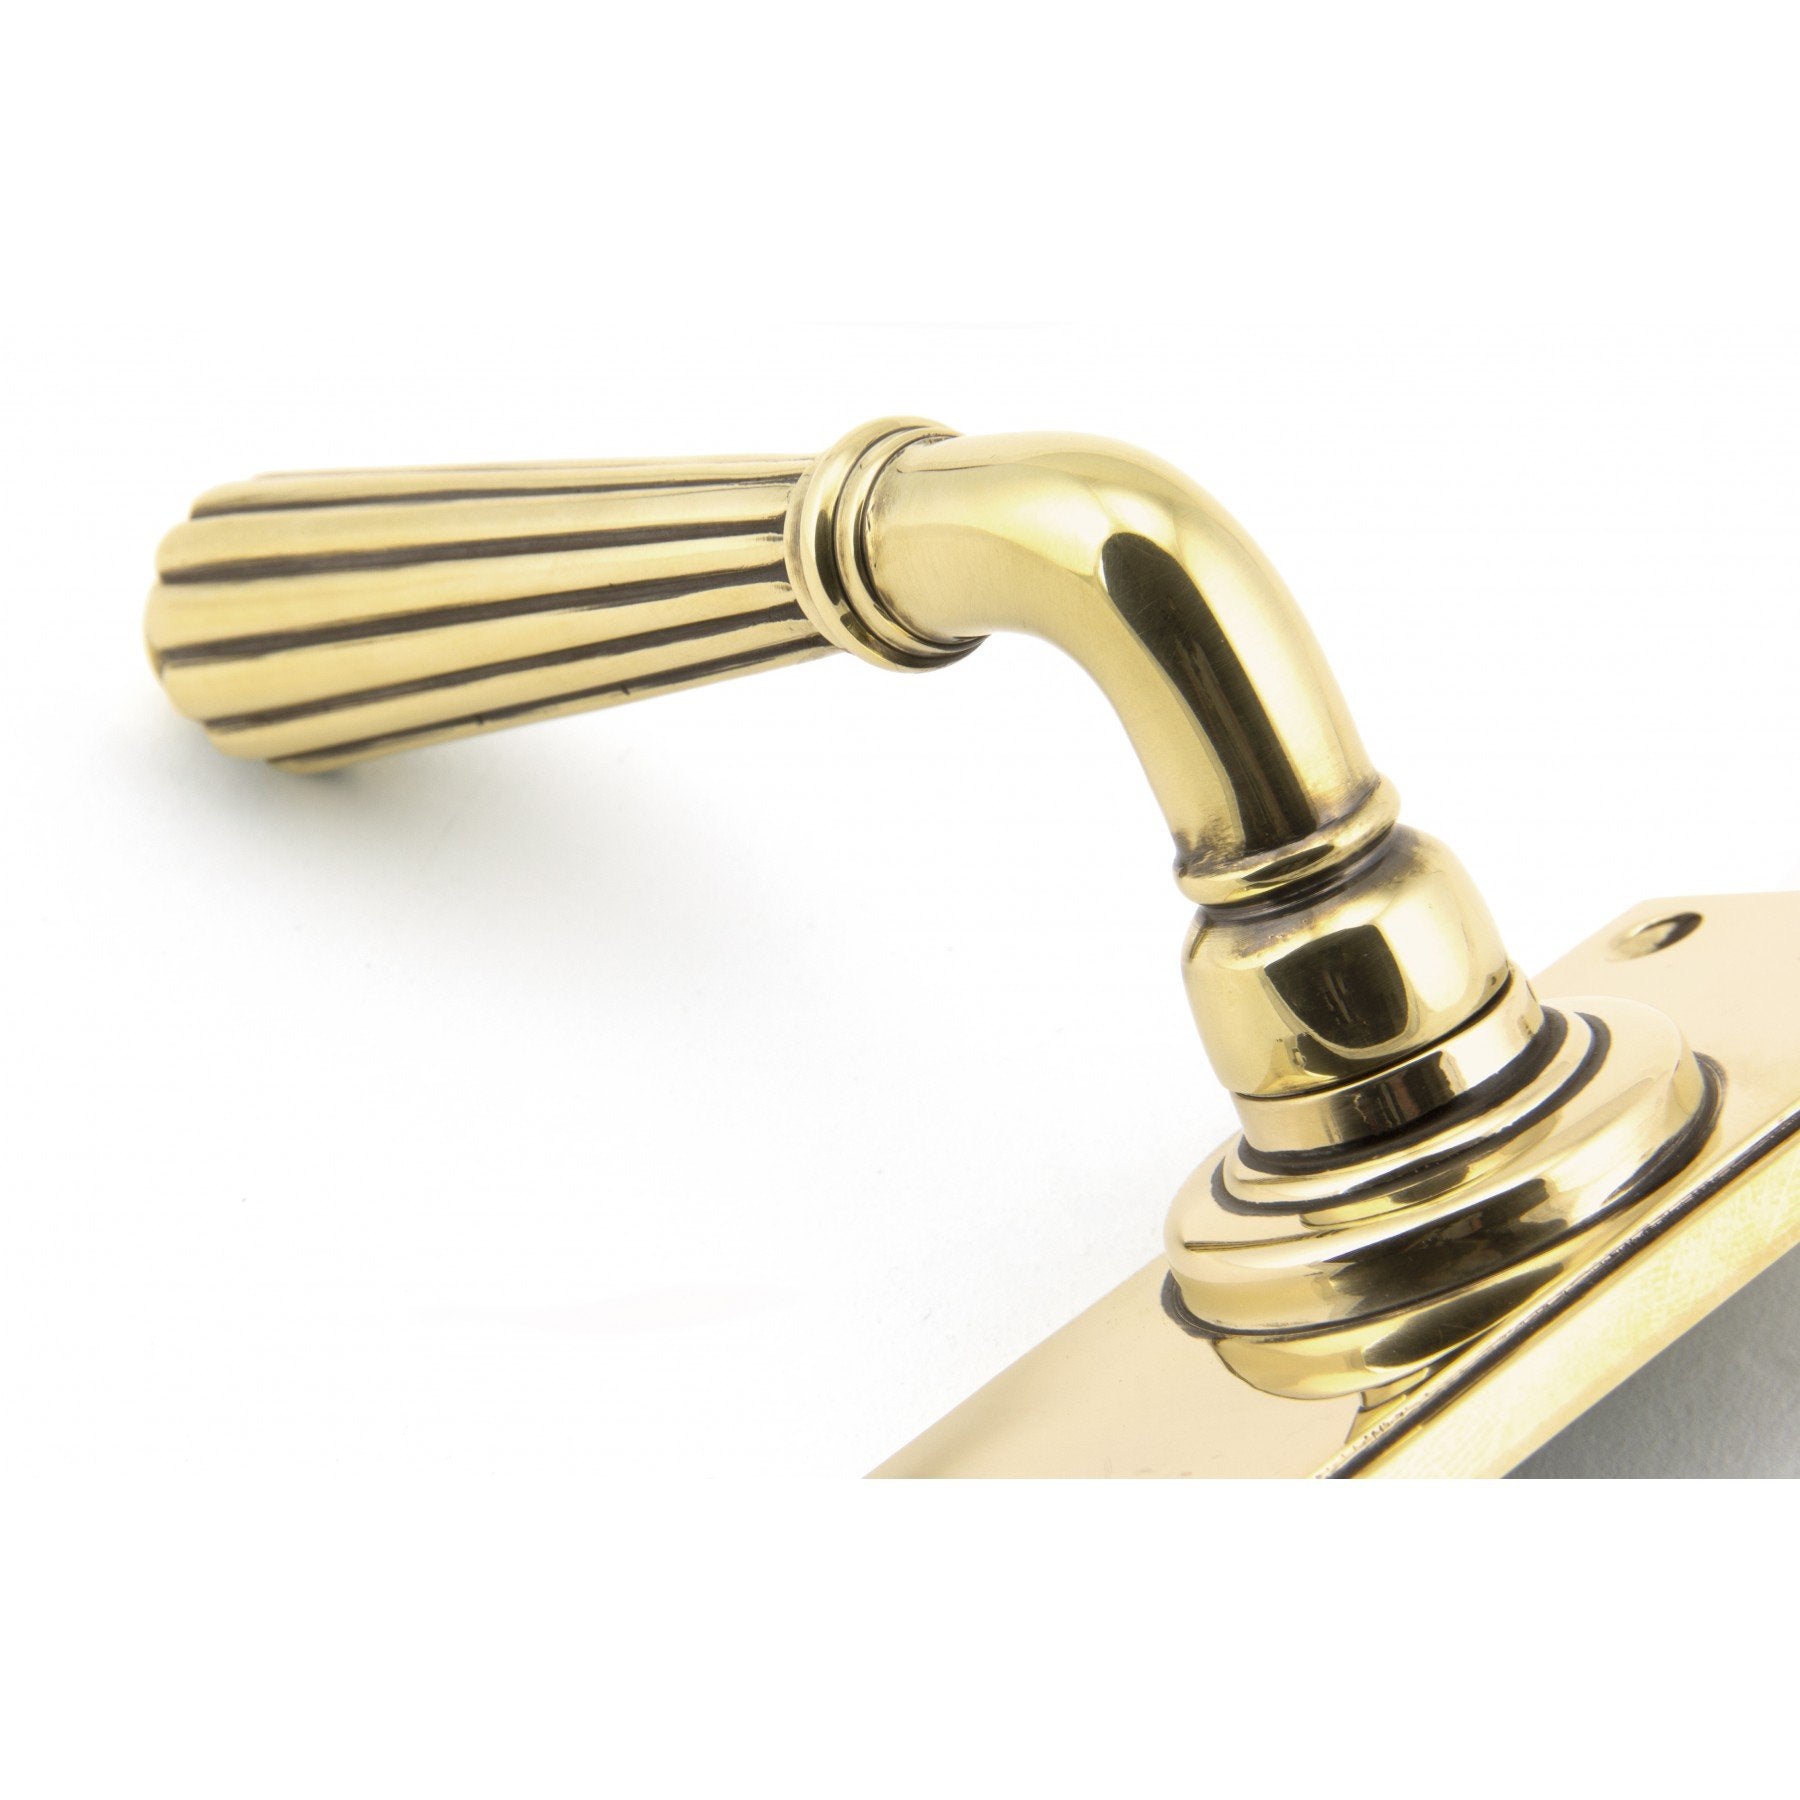 From the Anvil Aged Brass Hinton Lever Bathroom Set